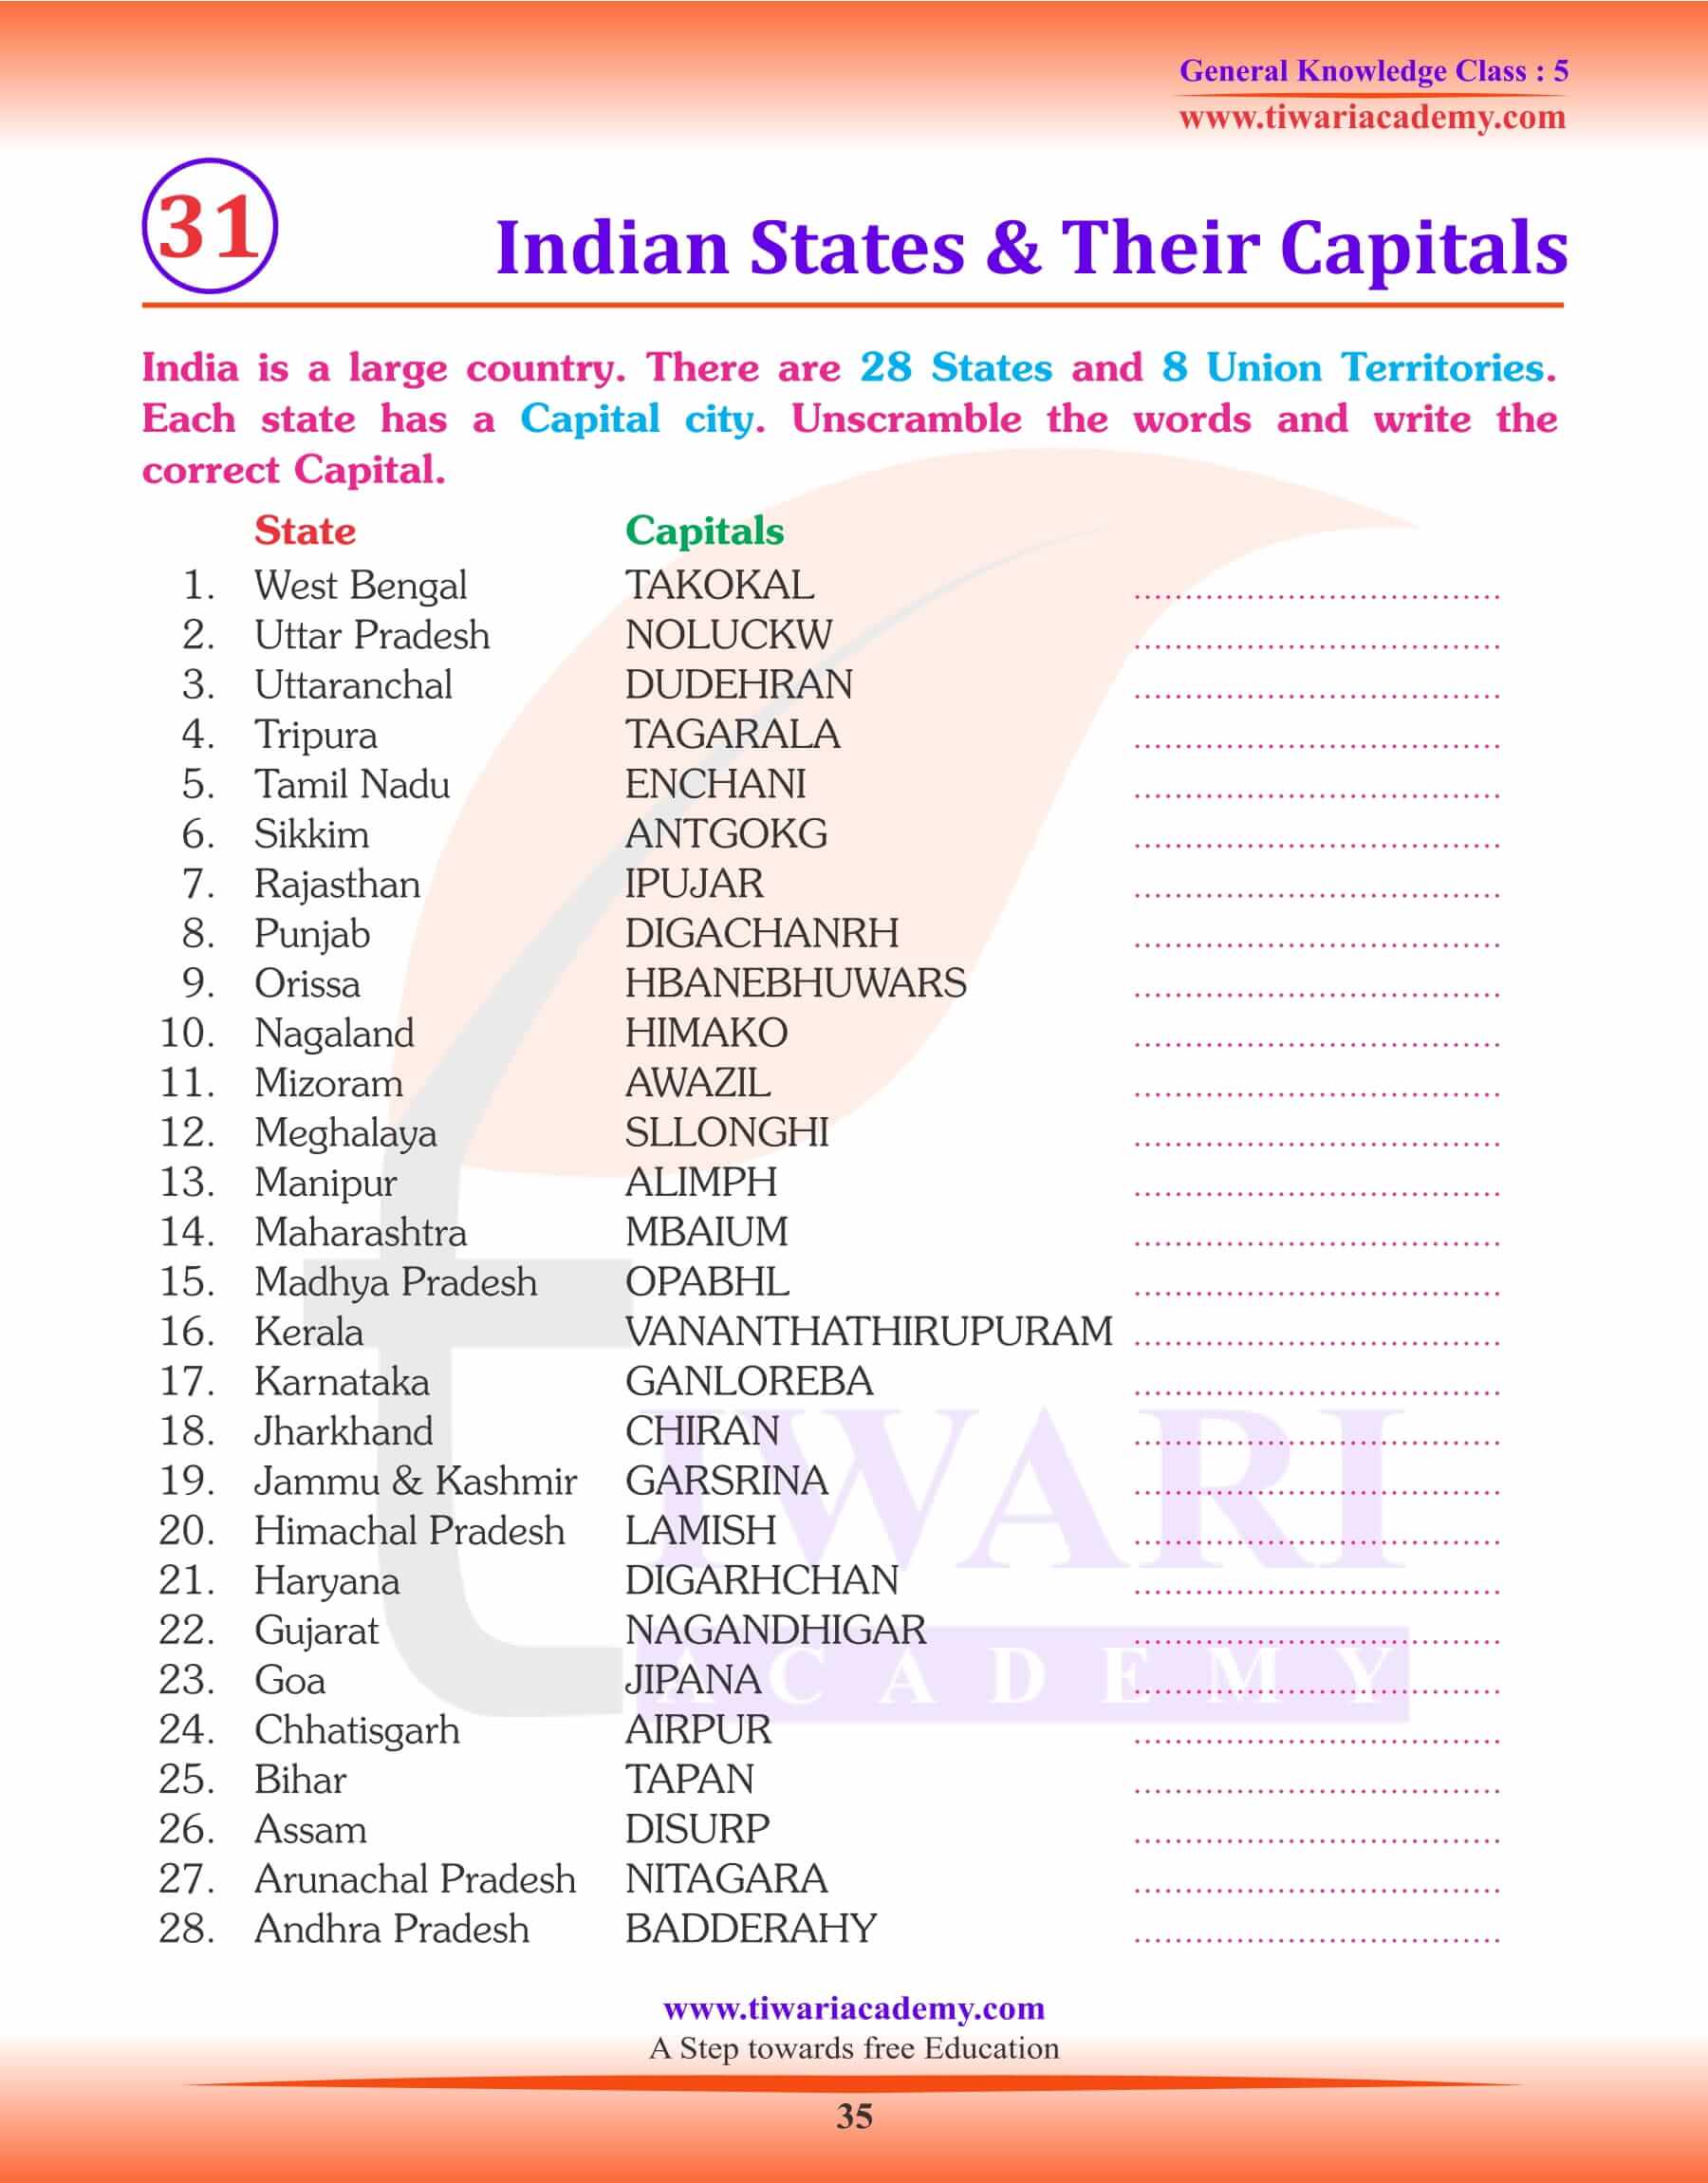 Indian States and their Capitals